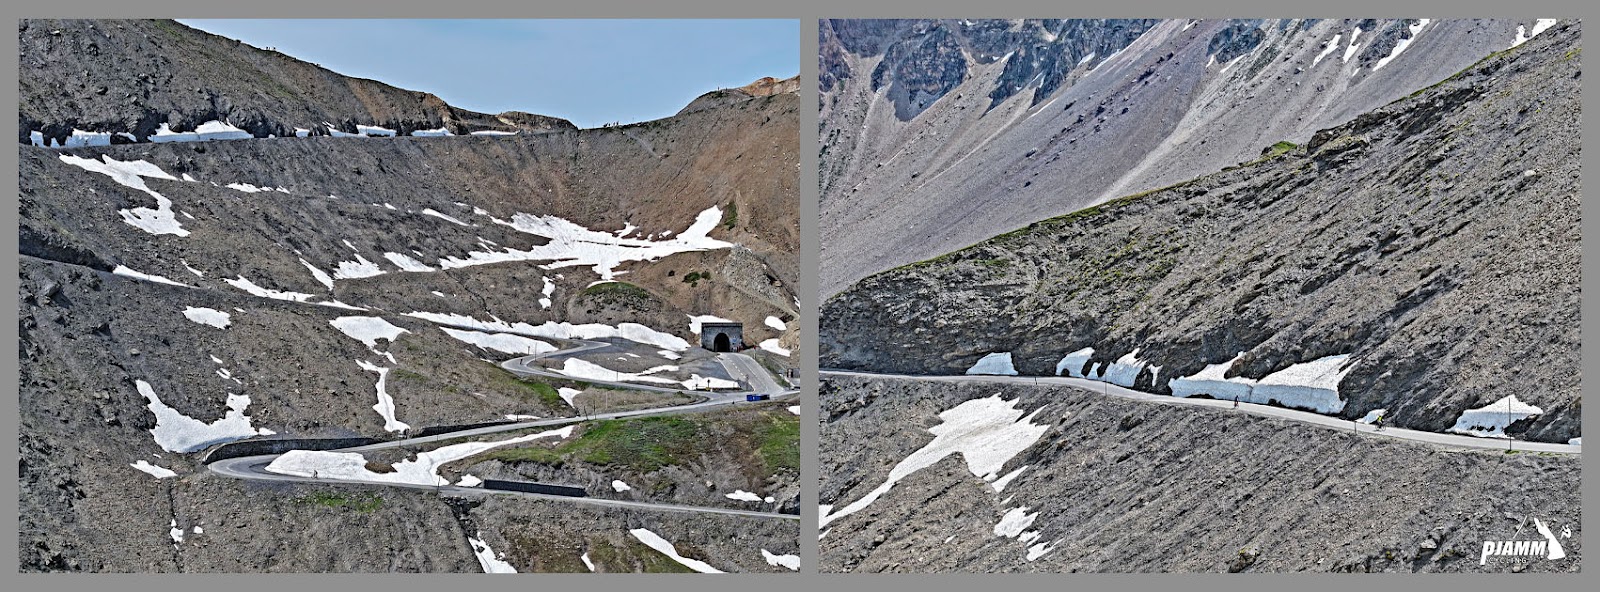 Cycling Col du Galibier from Valloire: photo collage shows final hairpins at climb finish, patches of snow lining the roadway